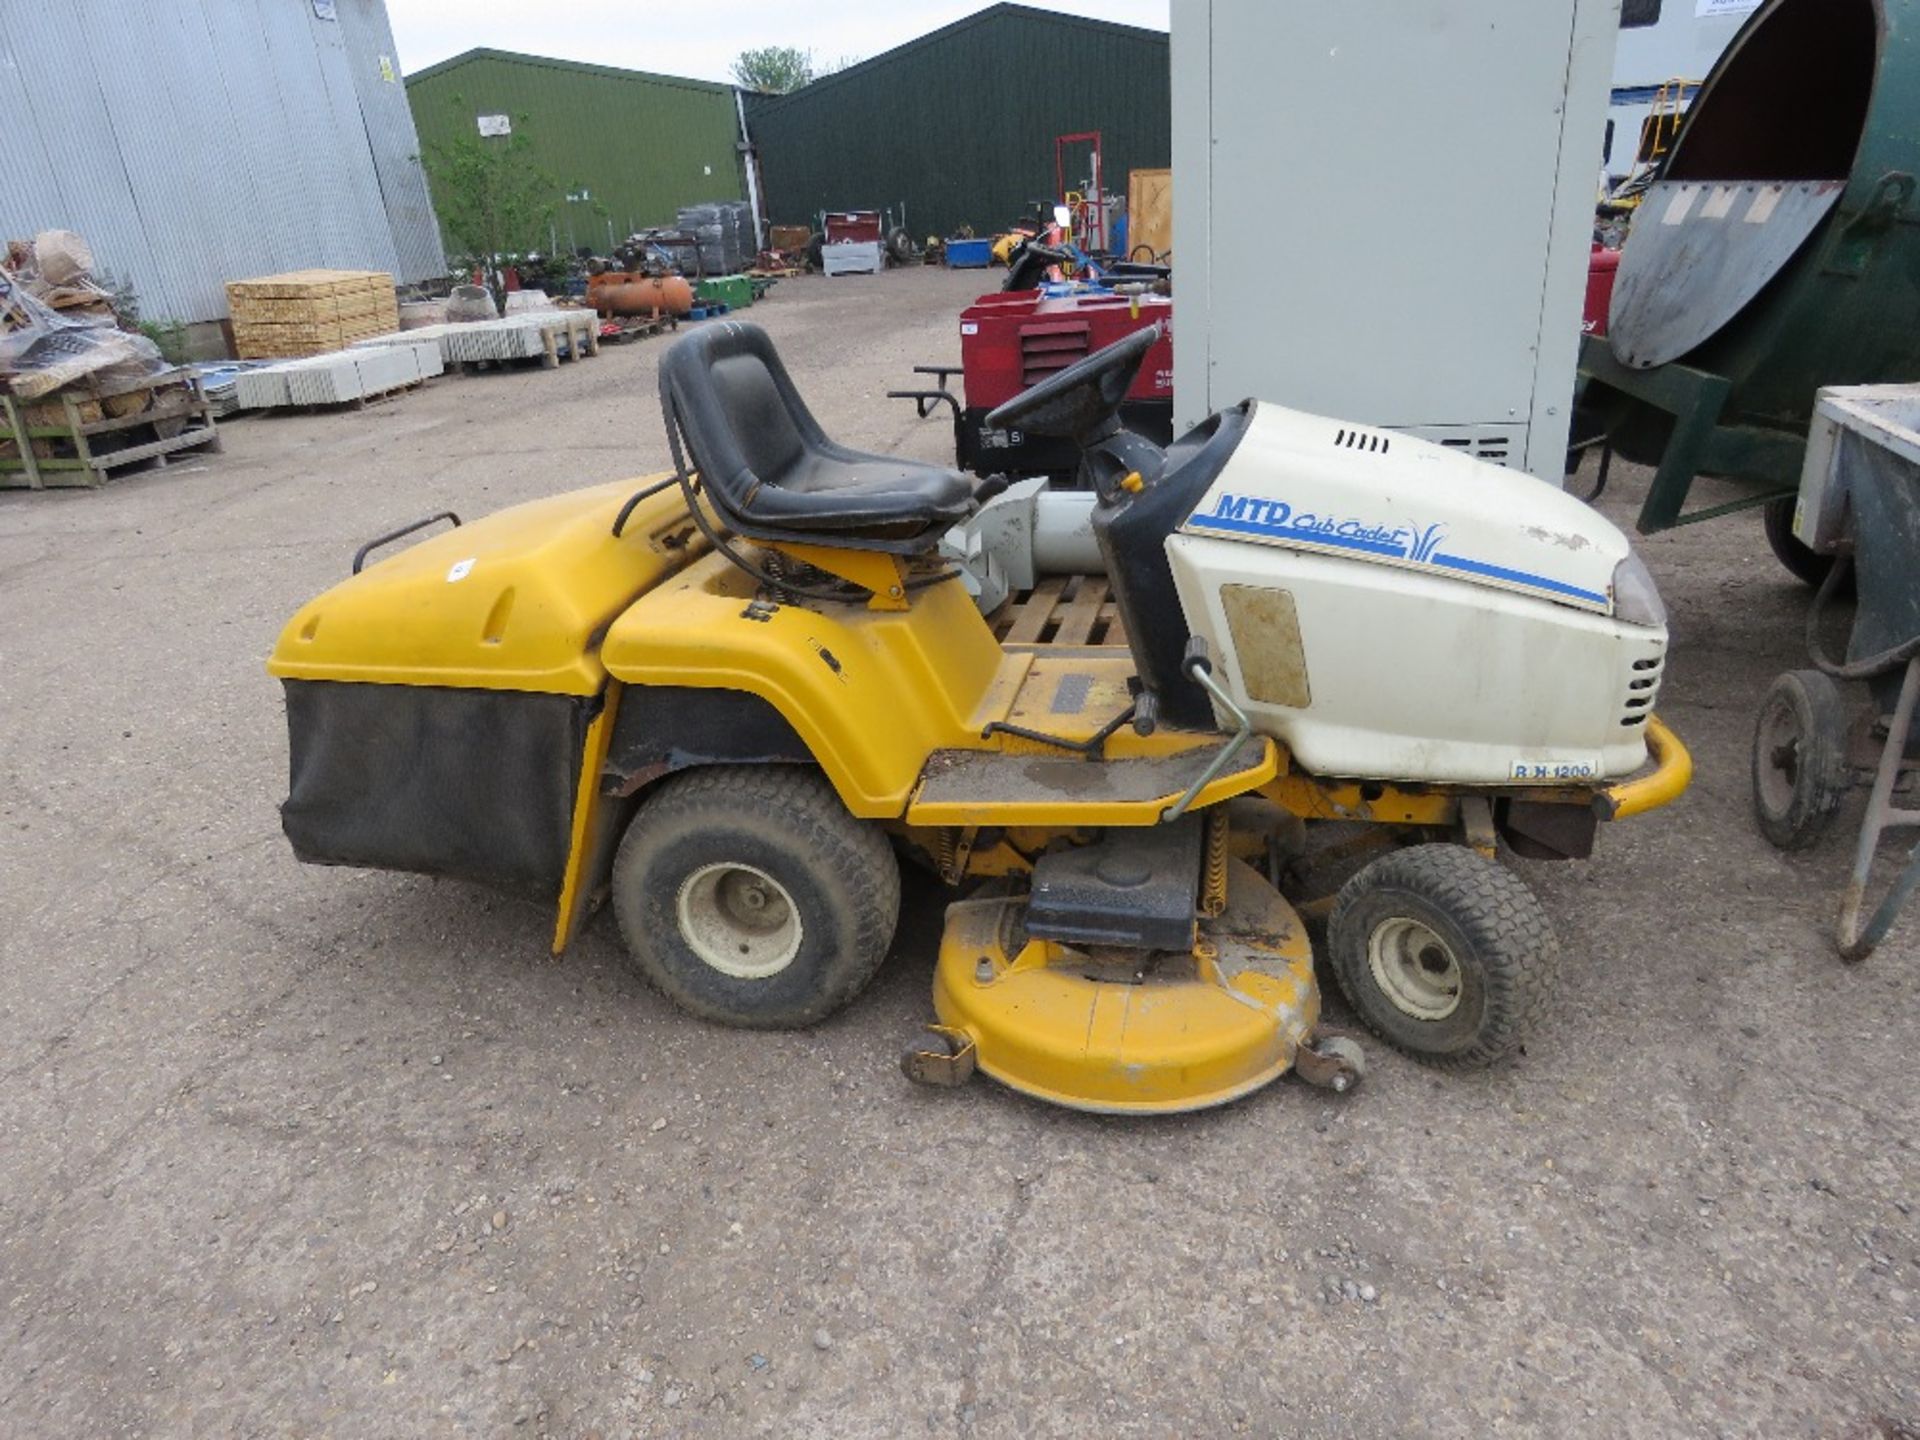 MTD CUB CADET PROFESSIONAL RIDE ON MOWER, PETROL ENGINED. BEEN IN STORAGE FOR SOME YEARS. NON RUNNER